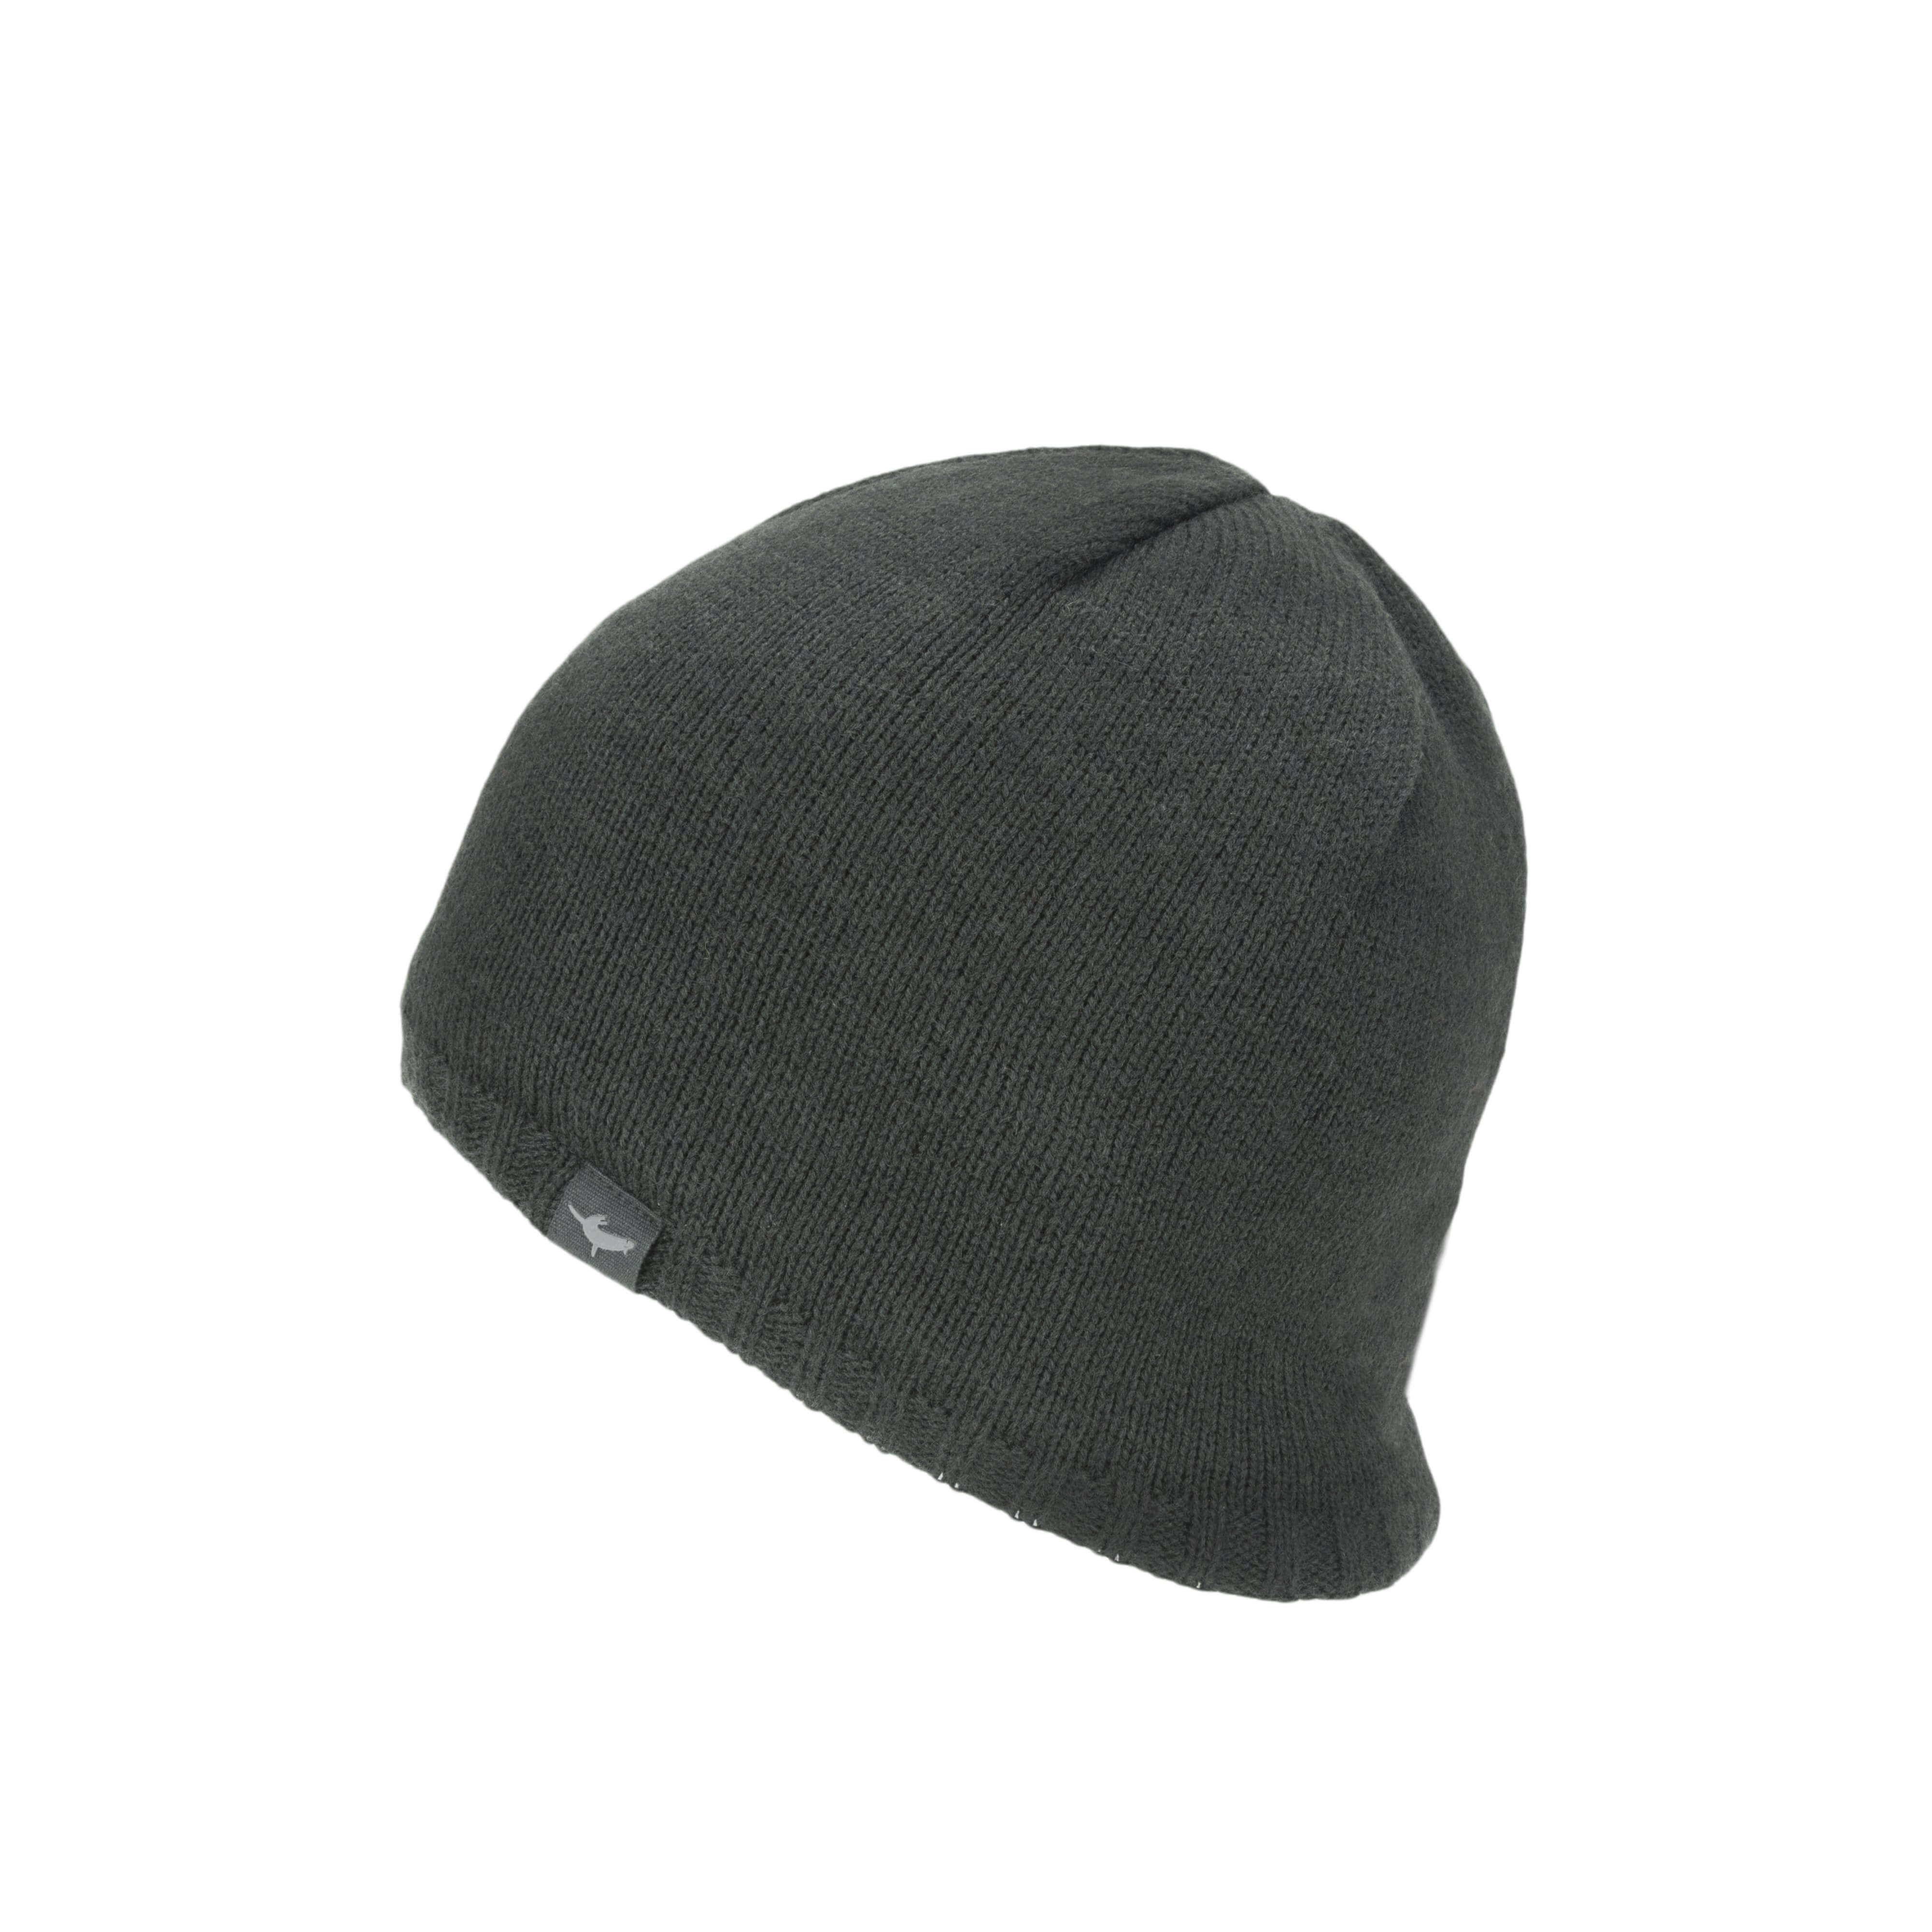 Waterproof Cold Weather Beanie Hat - Size: S / M - Color: Black